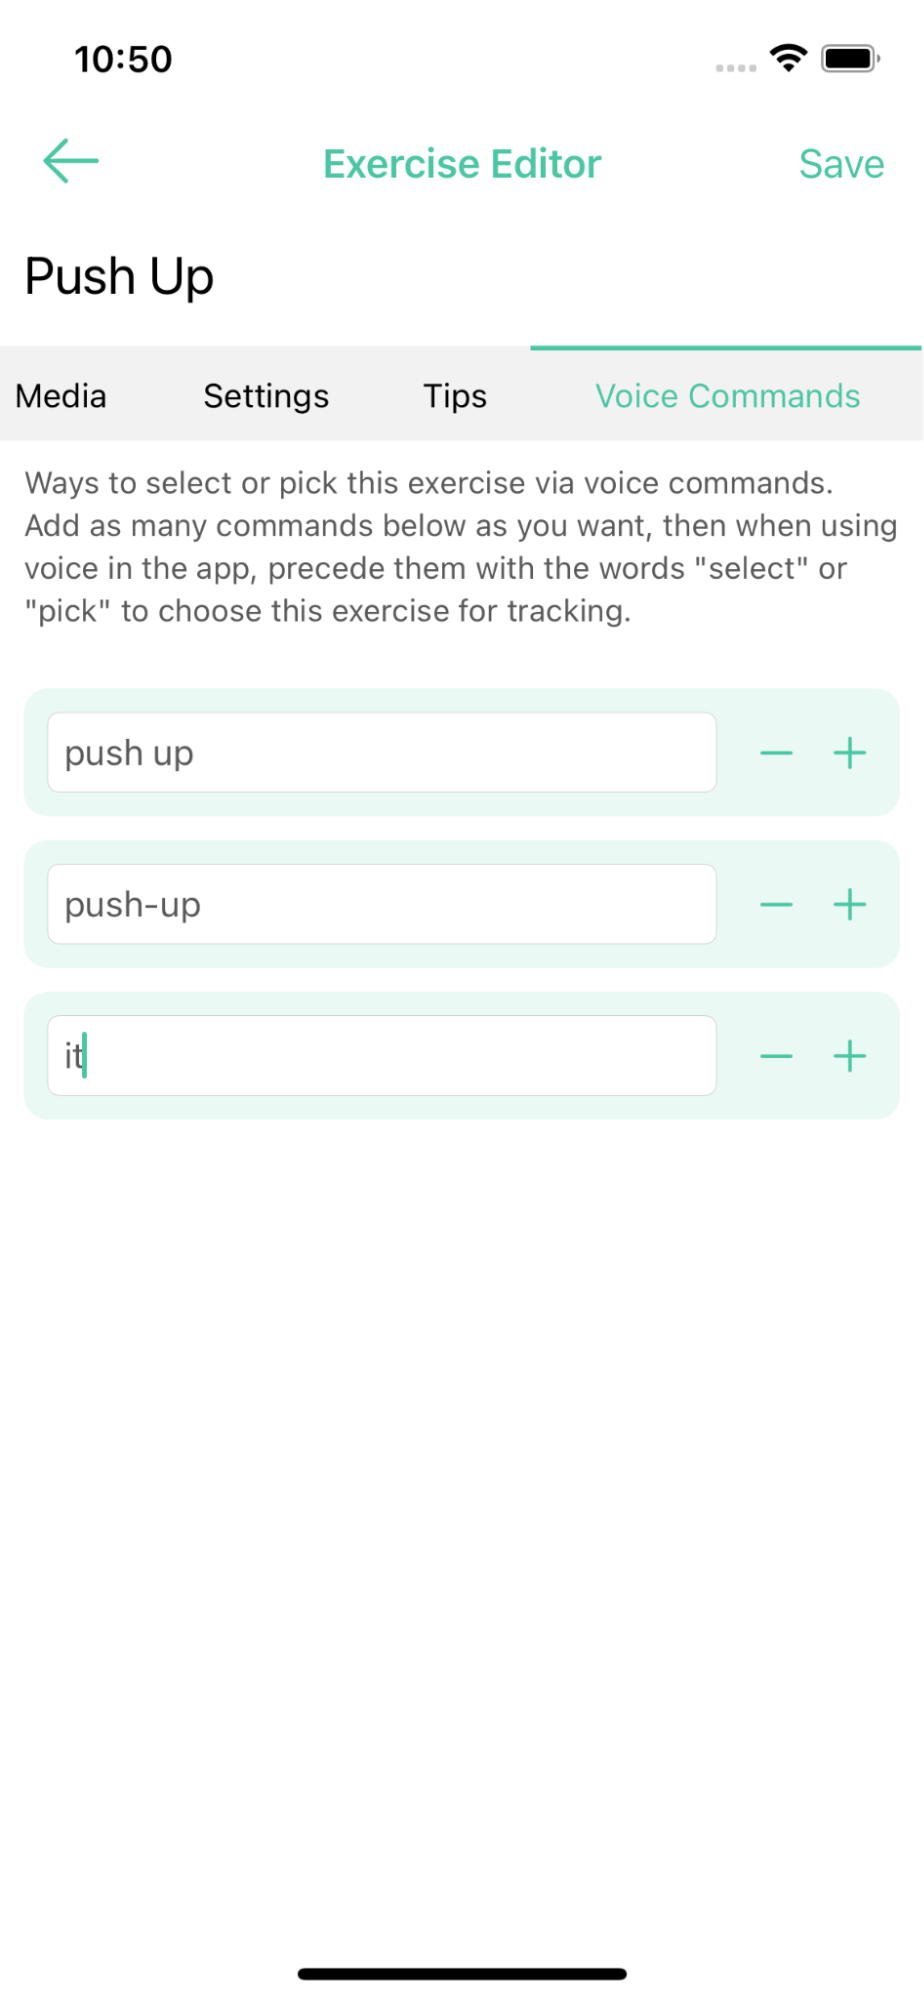 Your own voice commands for the custom exercise